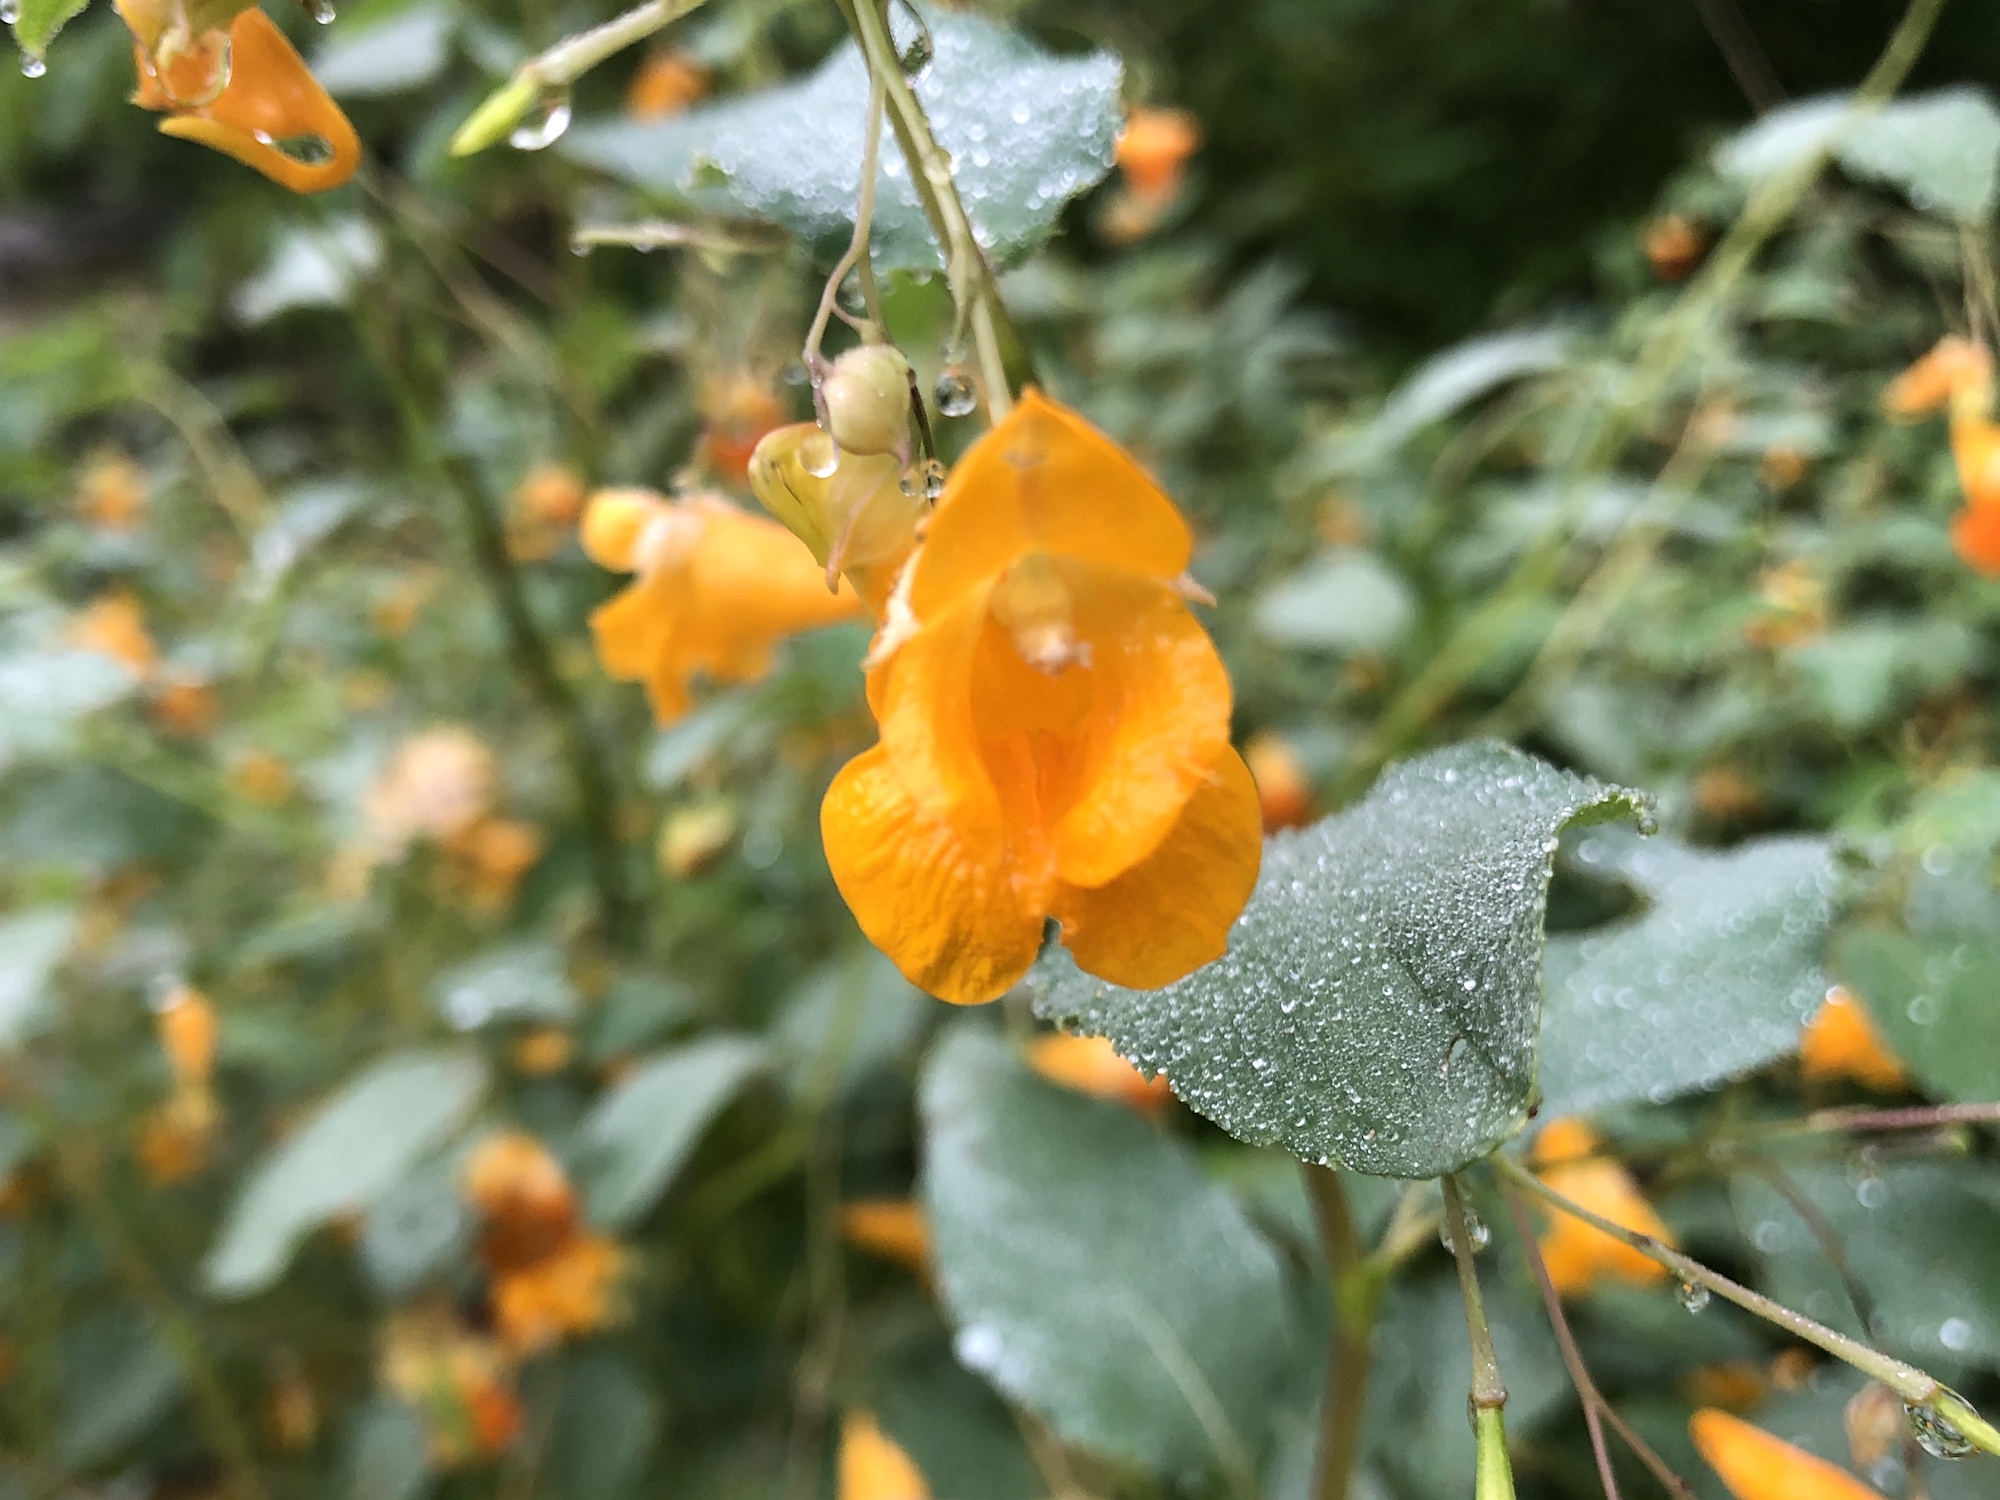 Spotted Jewelweed on shore of Duck Pond on August 21, 2019.